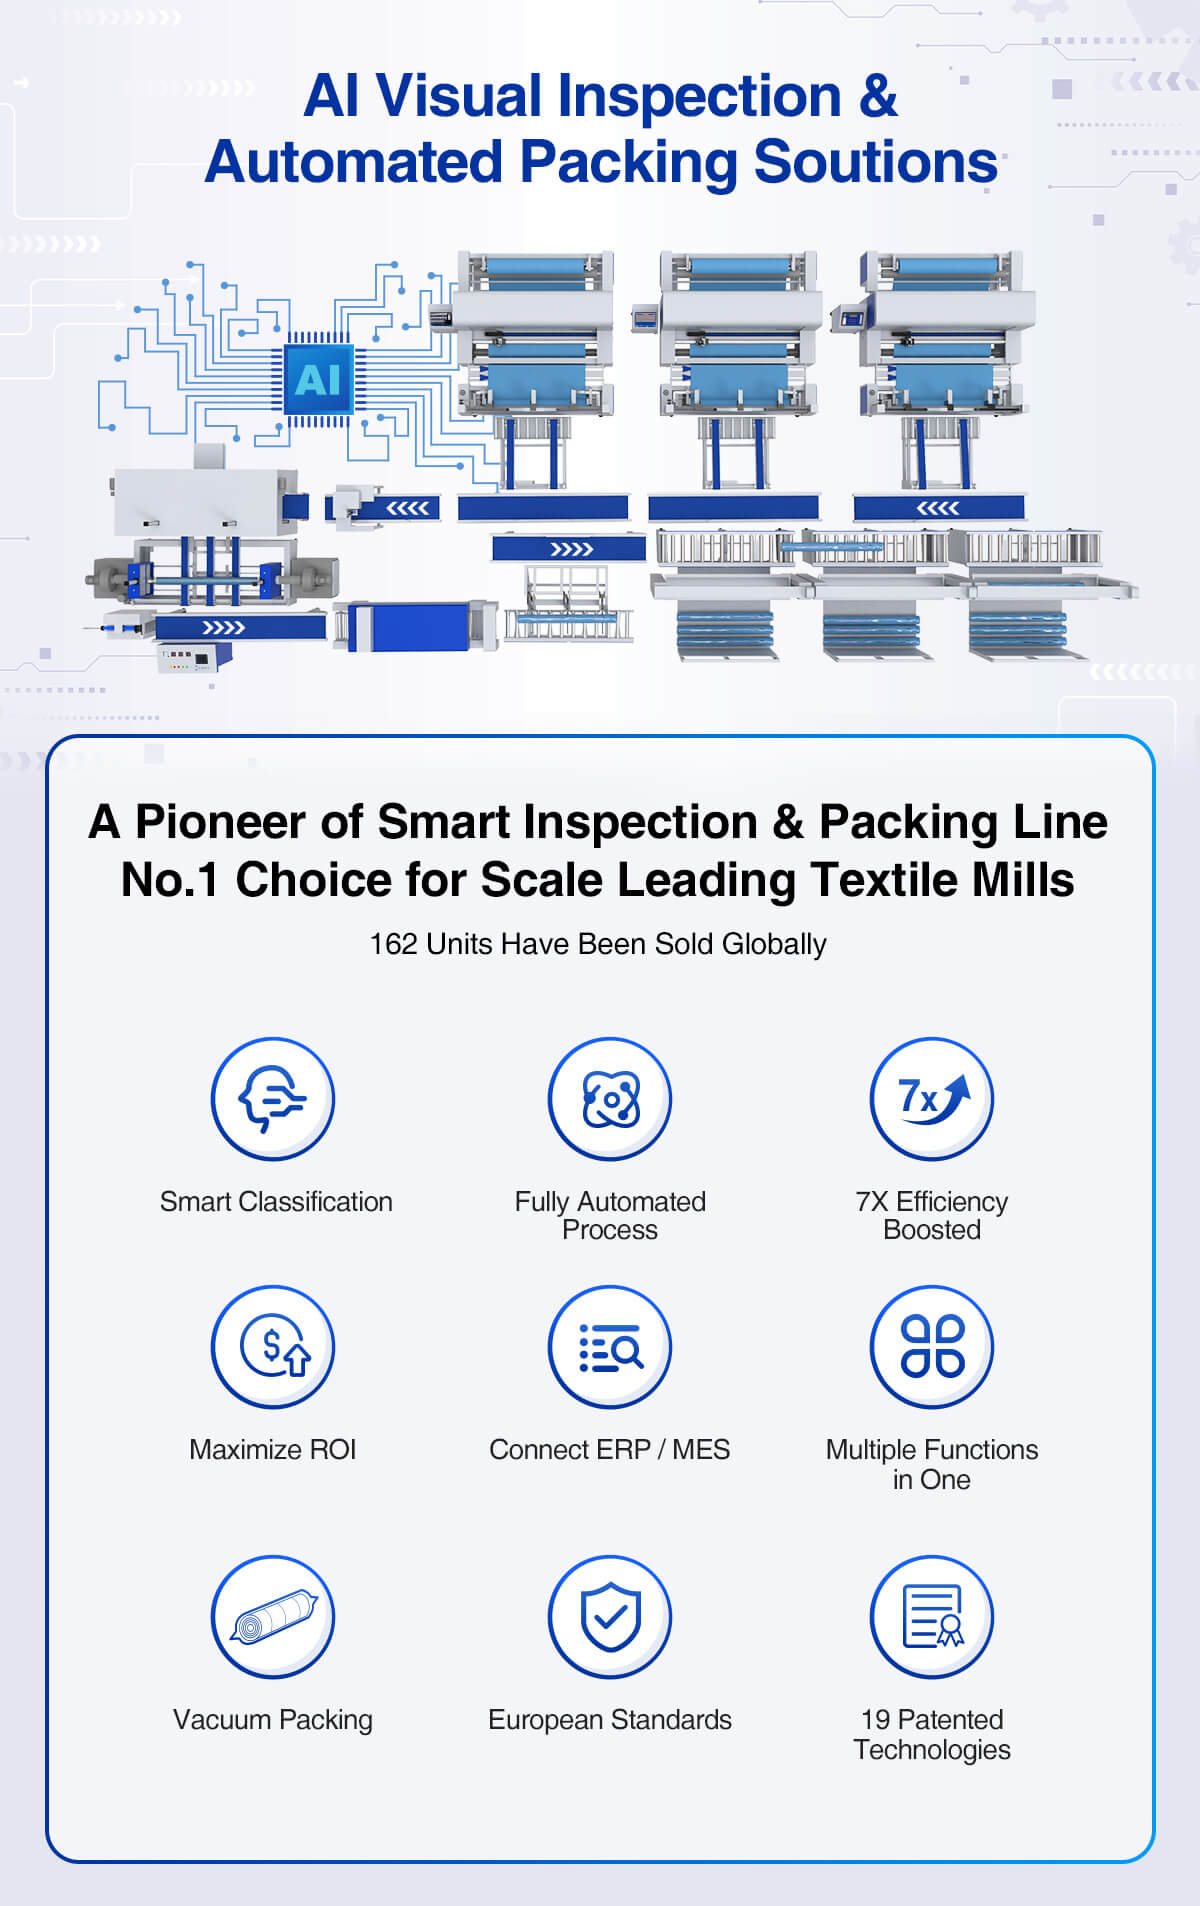 AI Visual Inspection & Automated Packing Solutions features